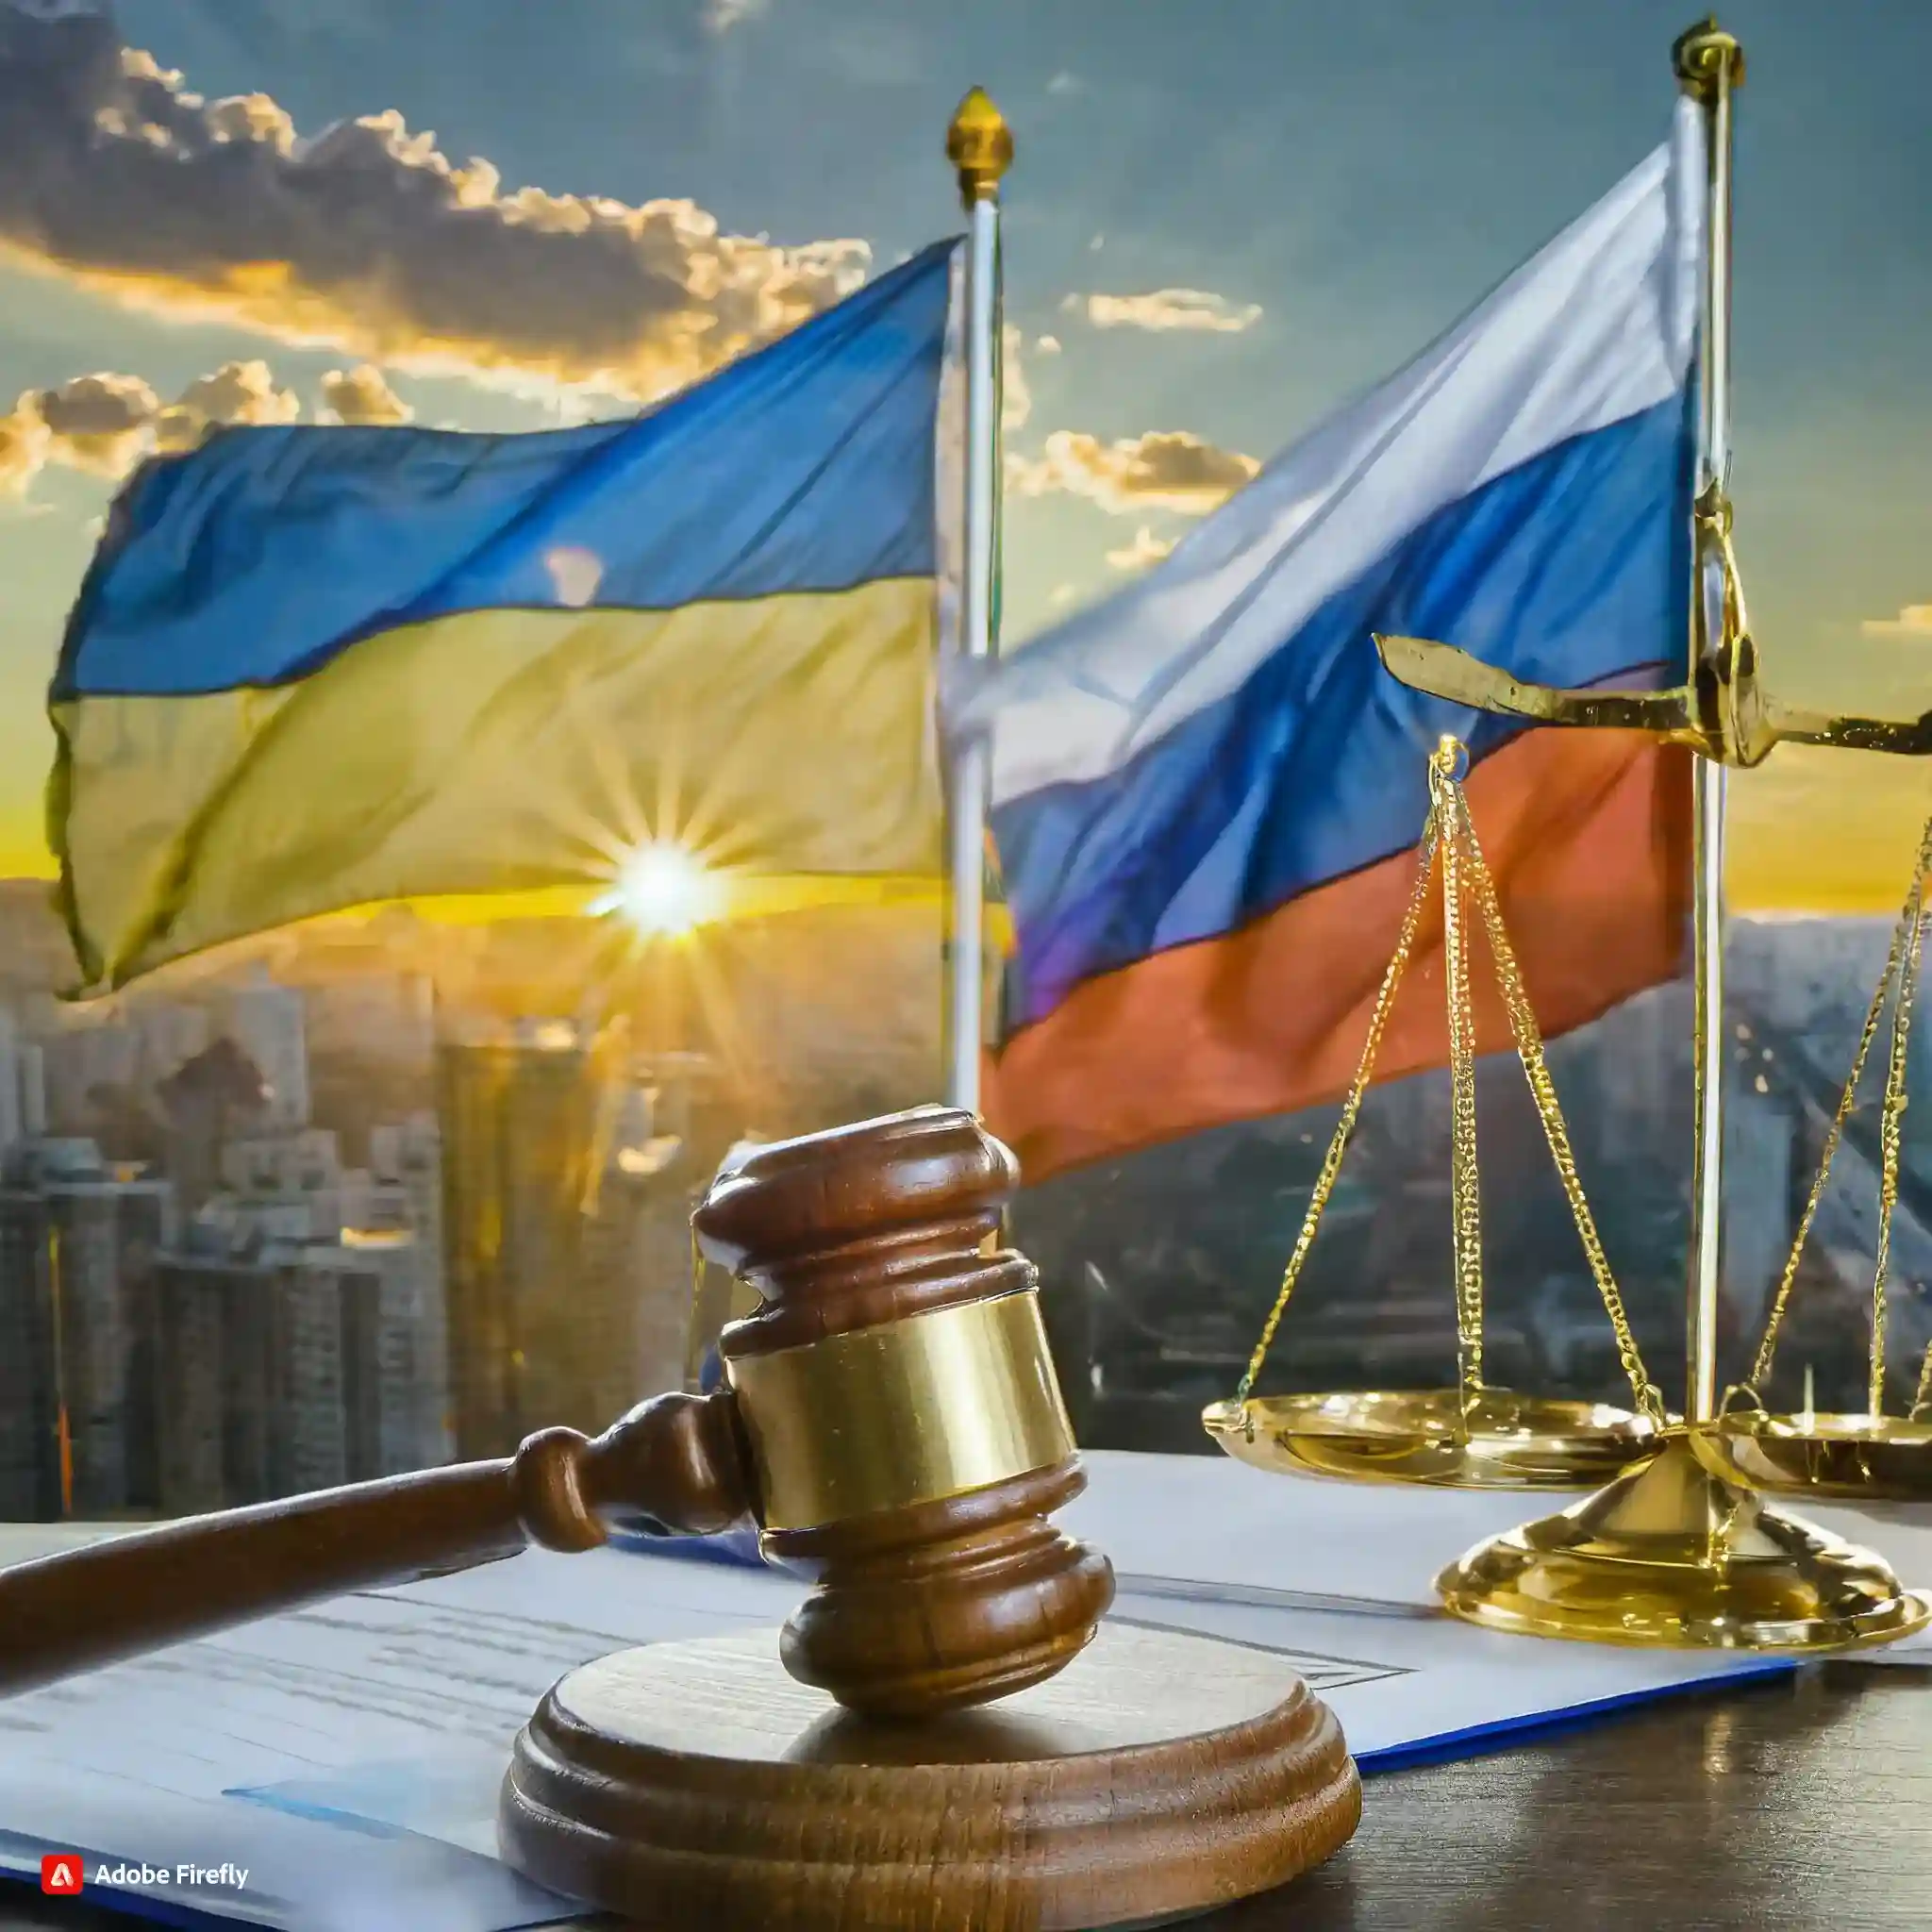 Ukraine and Russian flags, and a judge's gavel